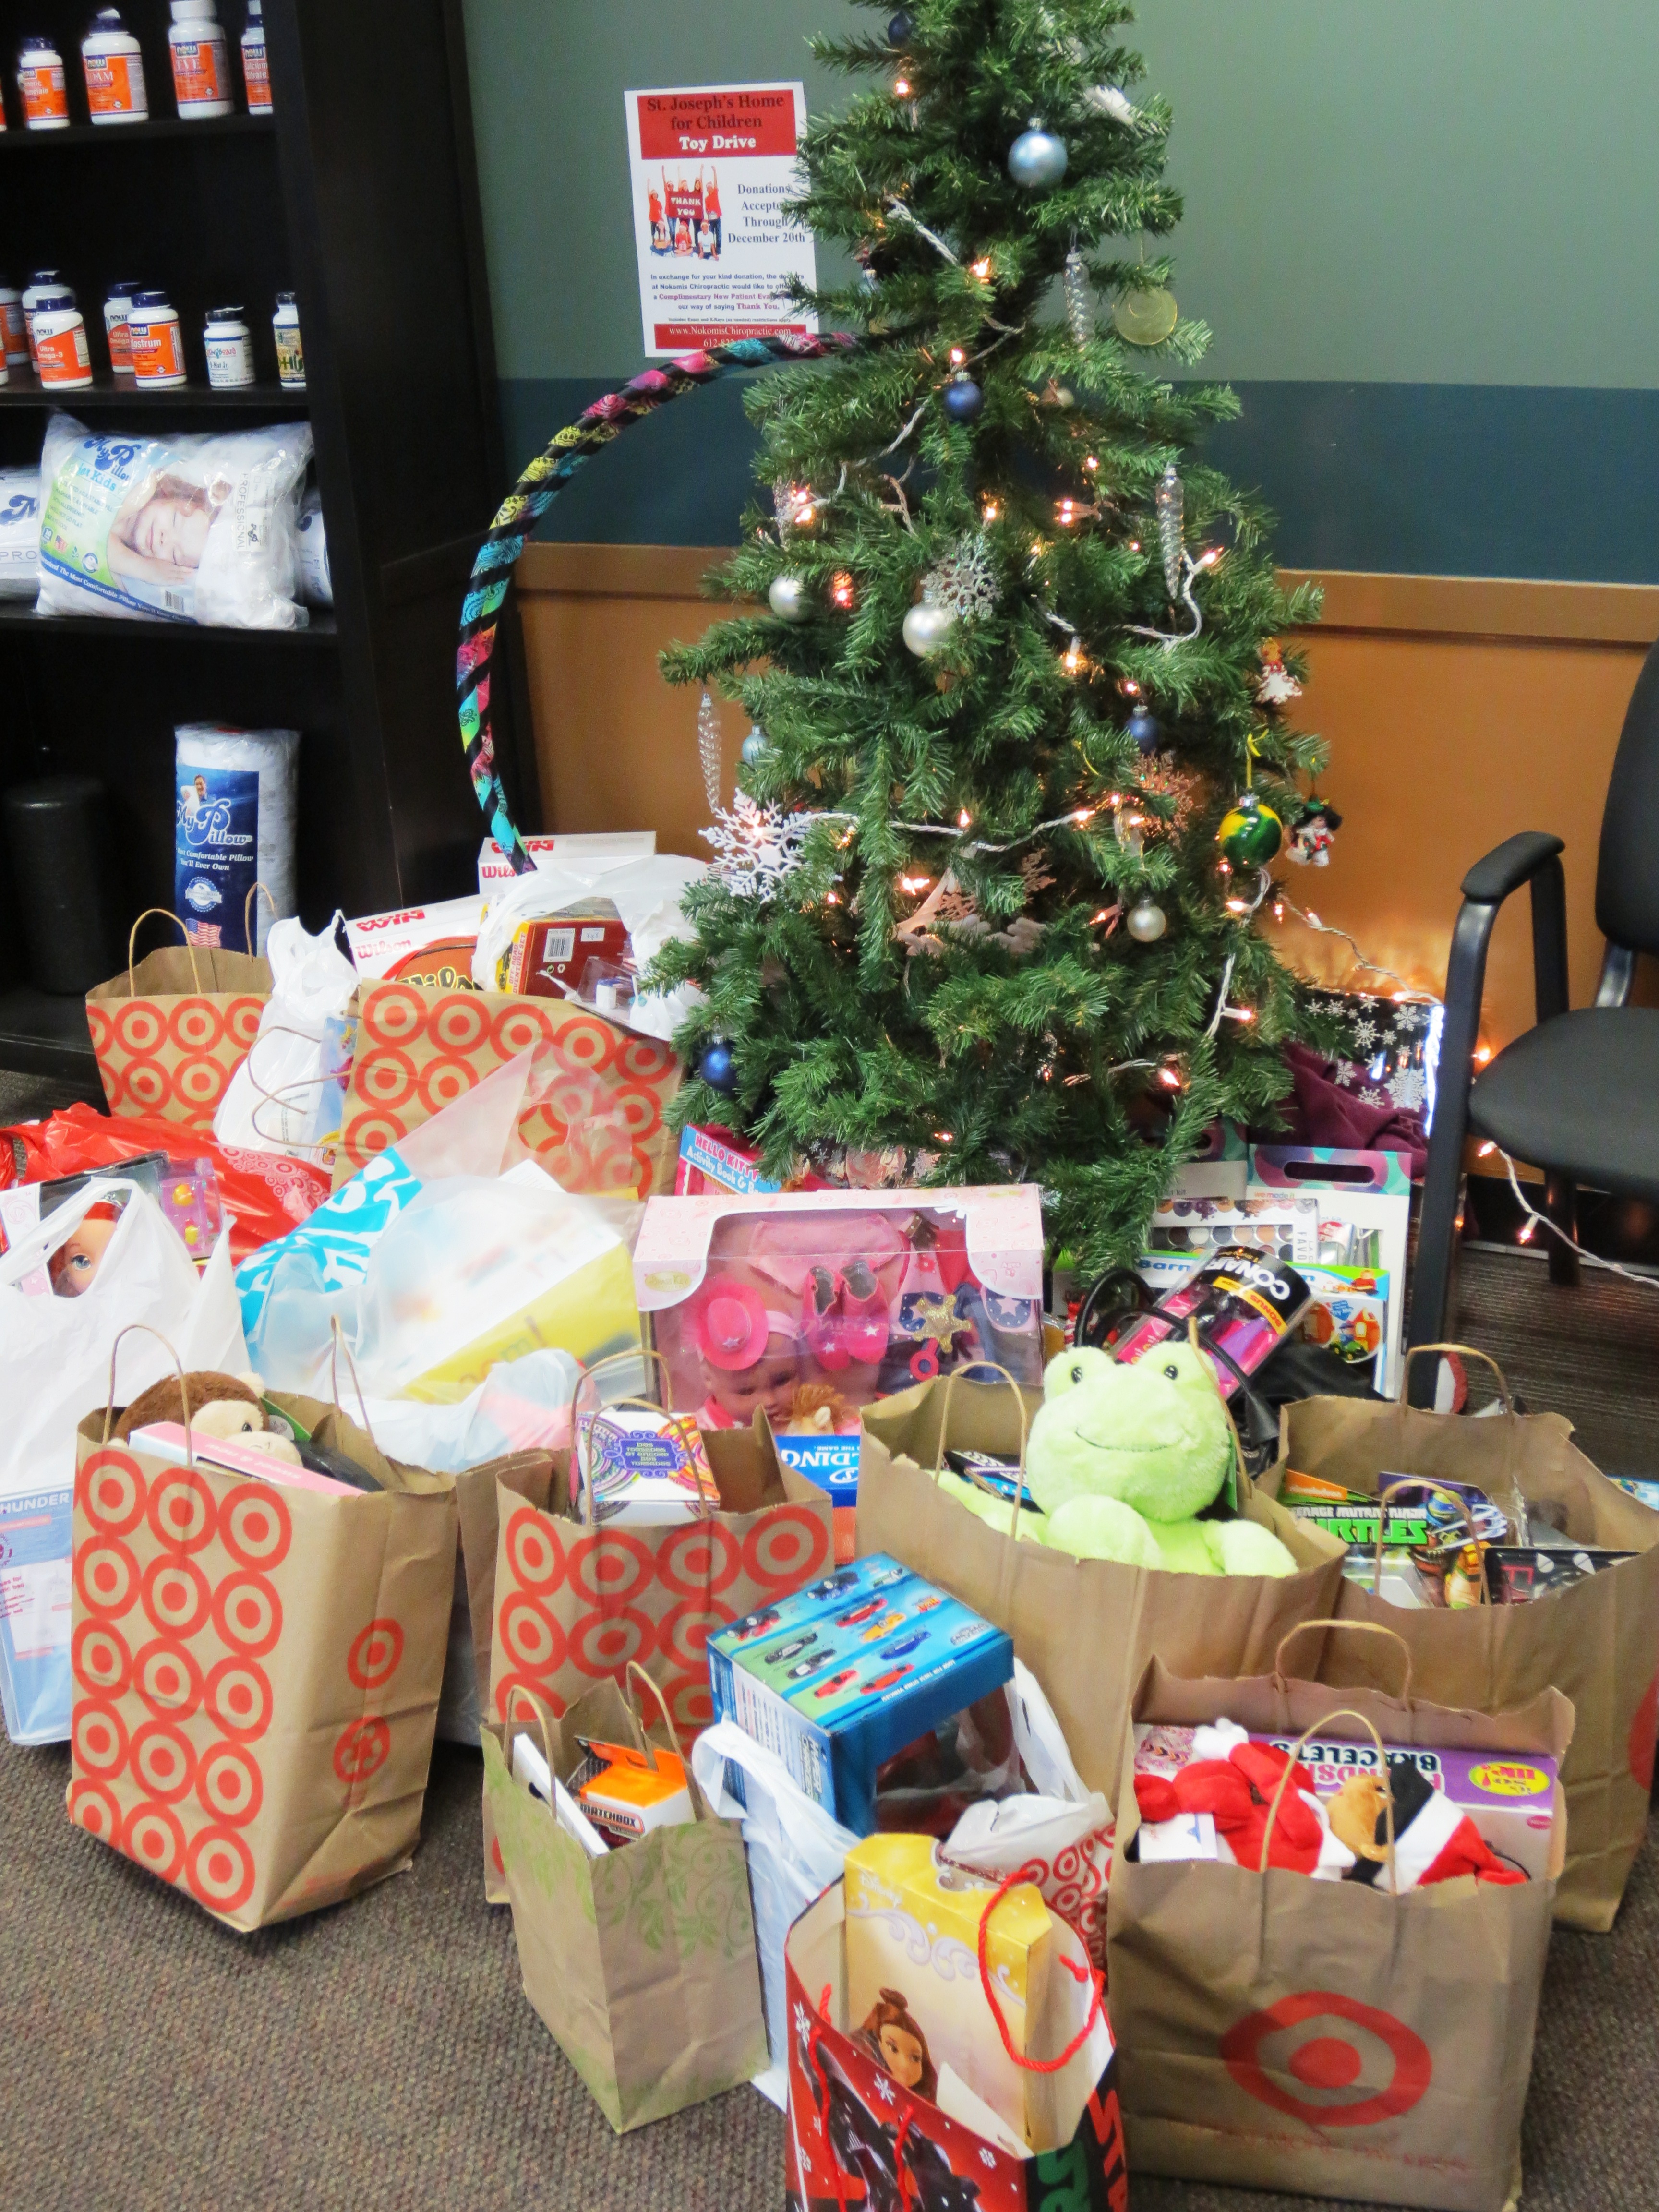 The amazing donations from our community for St. Joseph's